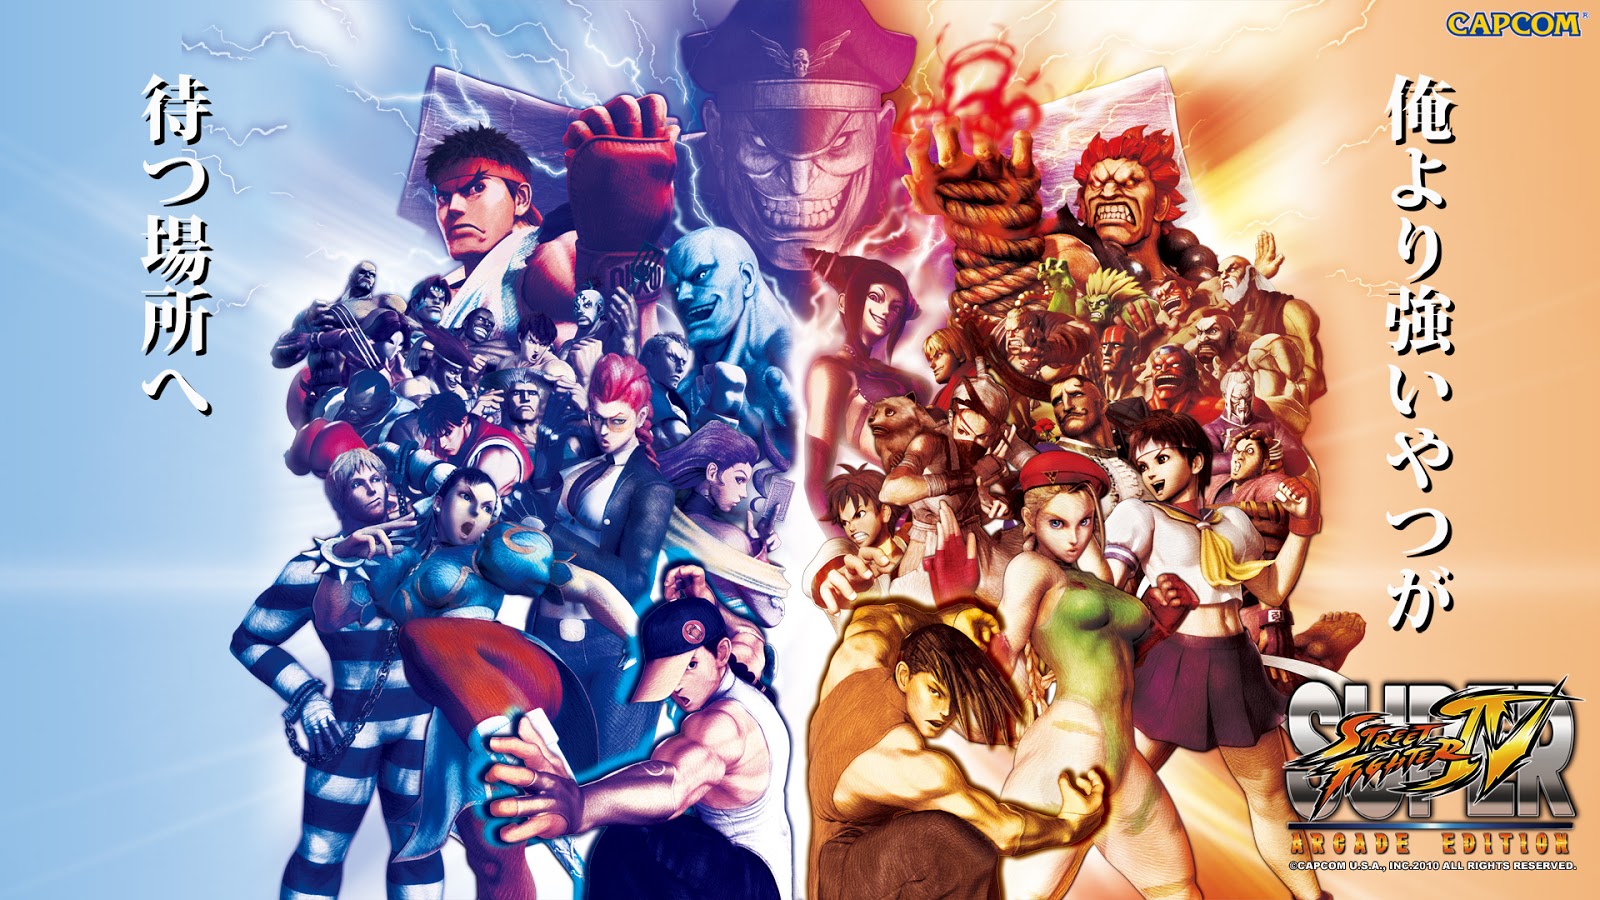 Pretty Cool Games Street Fighter Iv